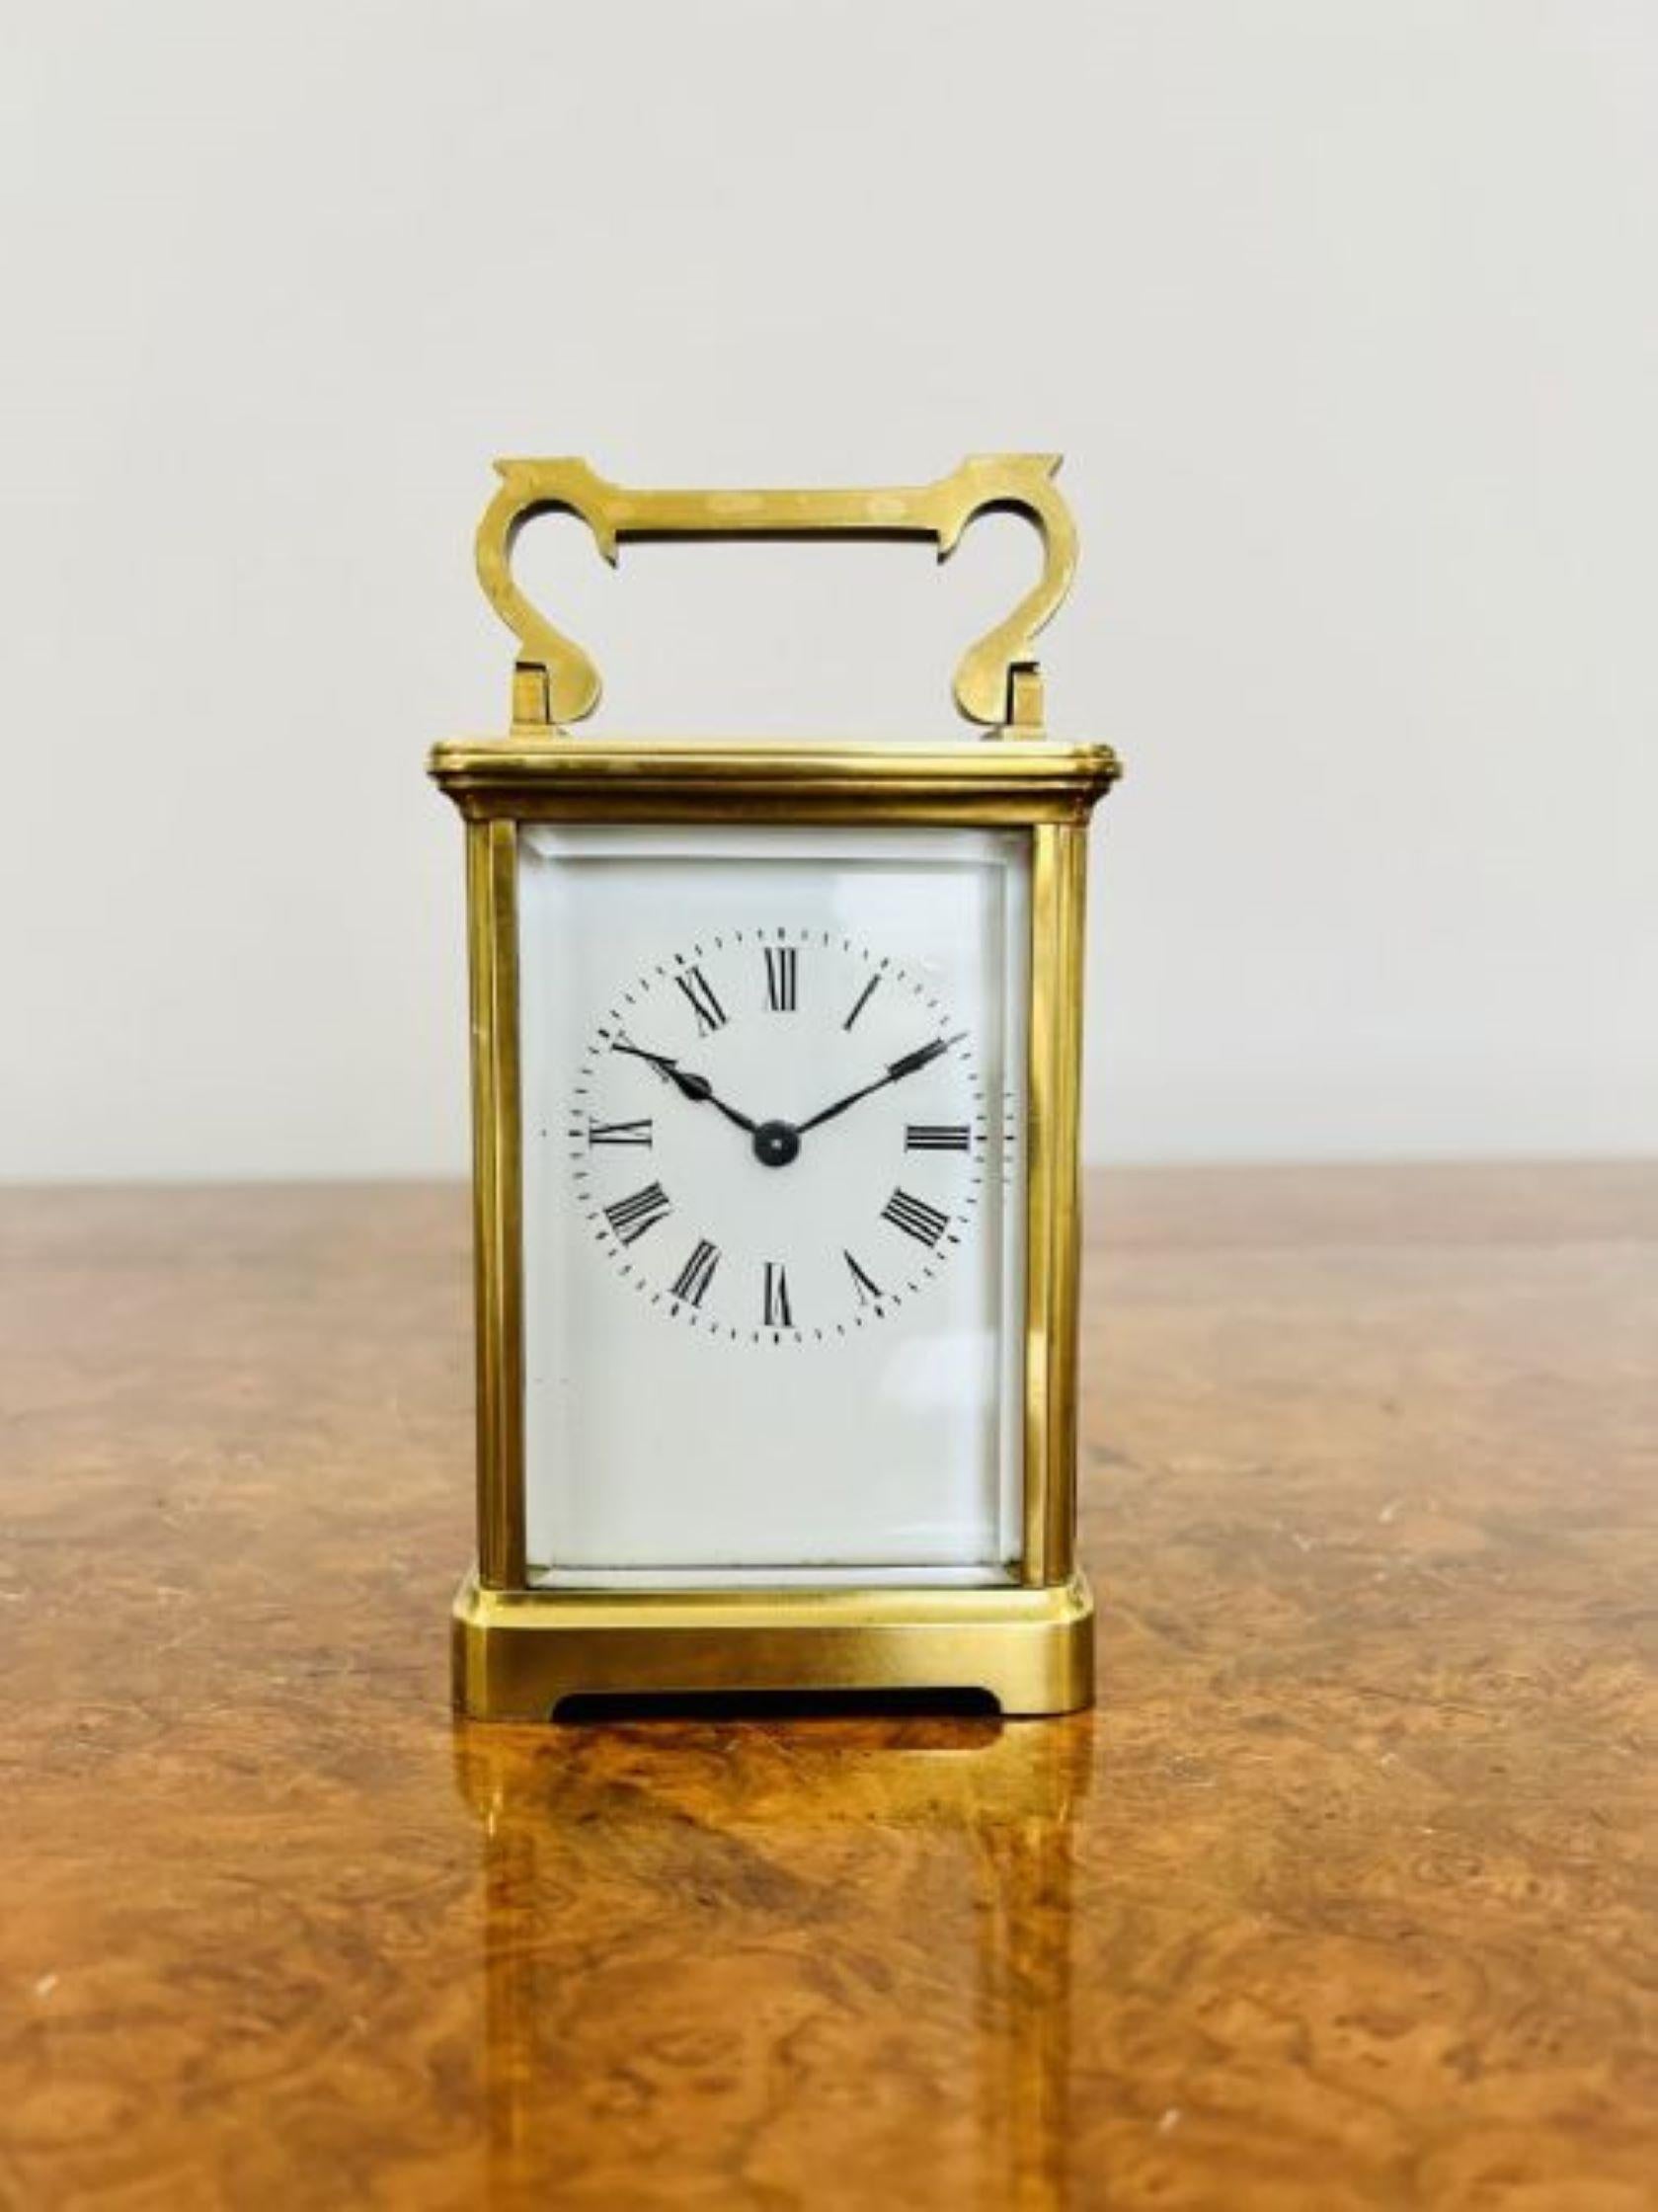 Antique Victorian quality brass carriage clock having a quality brass carriage clock with an 8 day French movement, bevelled edge, glass panels, a shaped carrying handle to the top with original key
Please note all of our clocks are serviced prior